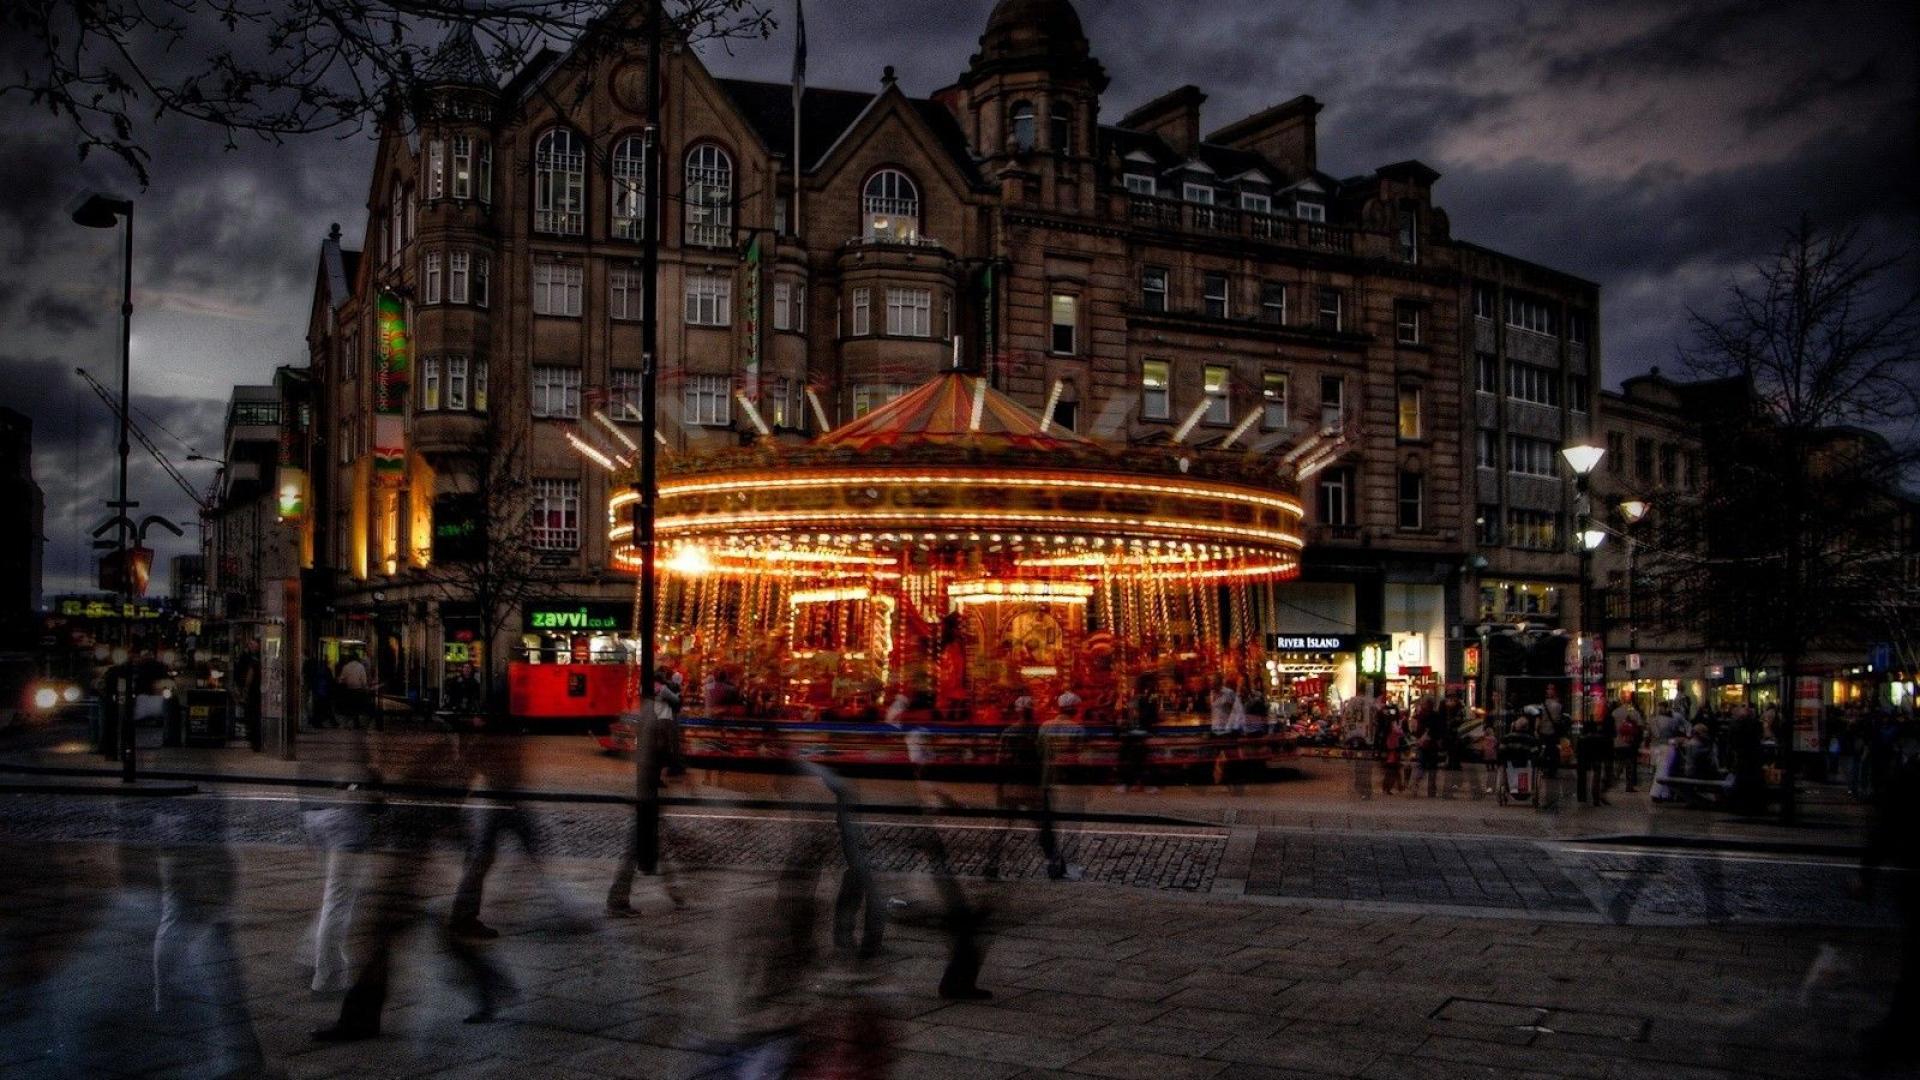 HD Merry Go Round In Sheffield Engl Hdr Wallpaper. Download Free